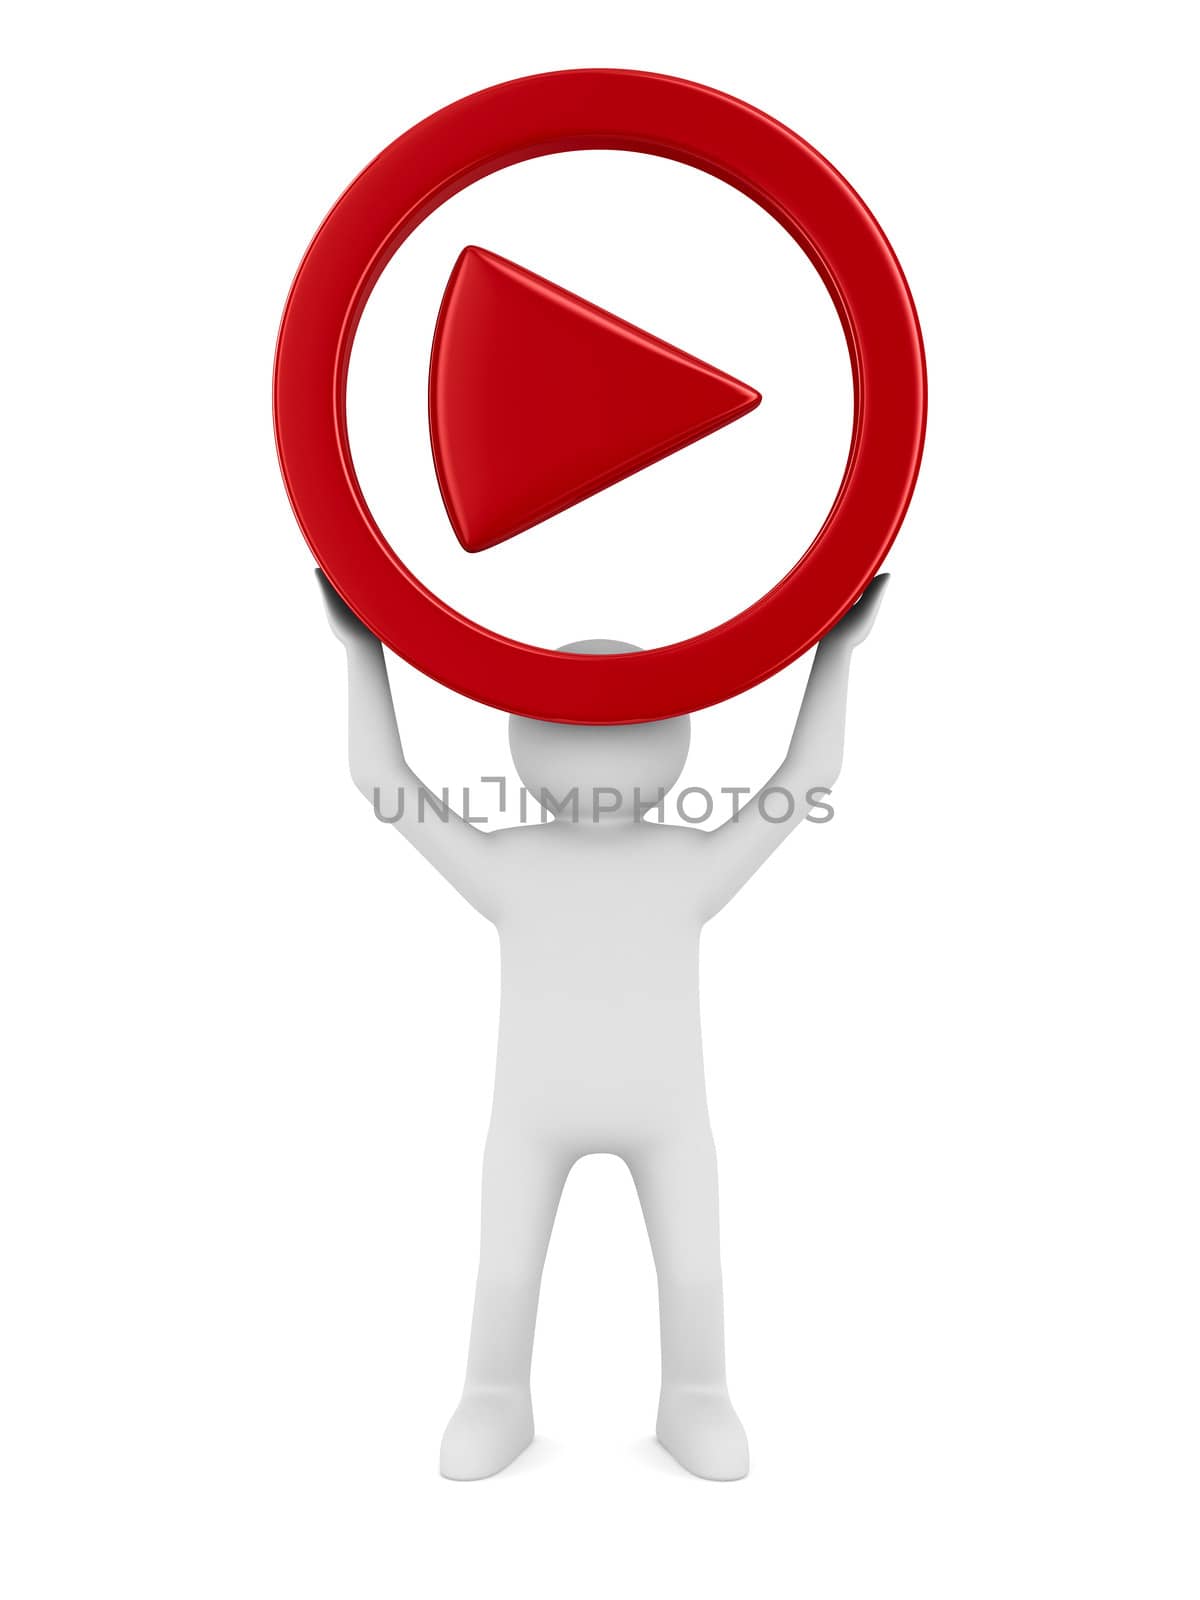 play sign on white background. Isolated 3D image